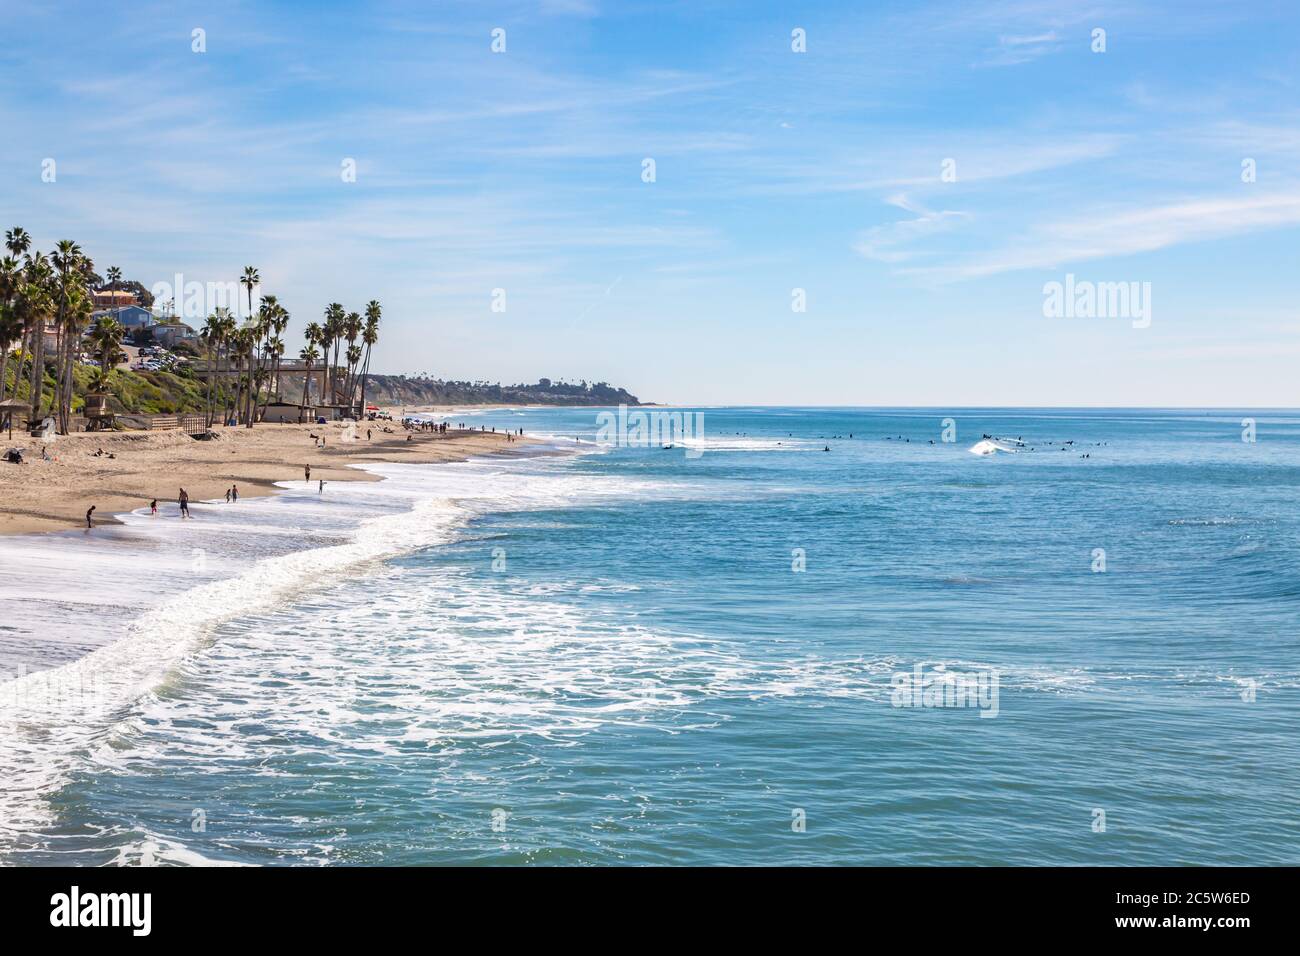 Looking down at the beach and ocean, in San Clemente, California Stock Photo